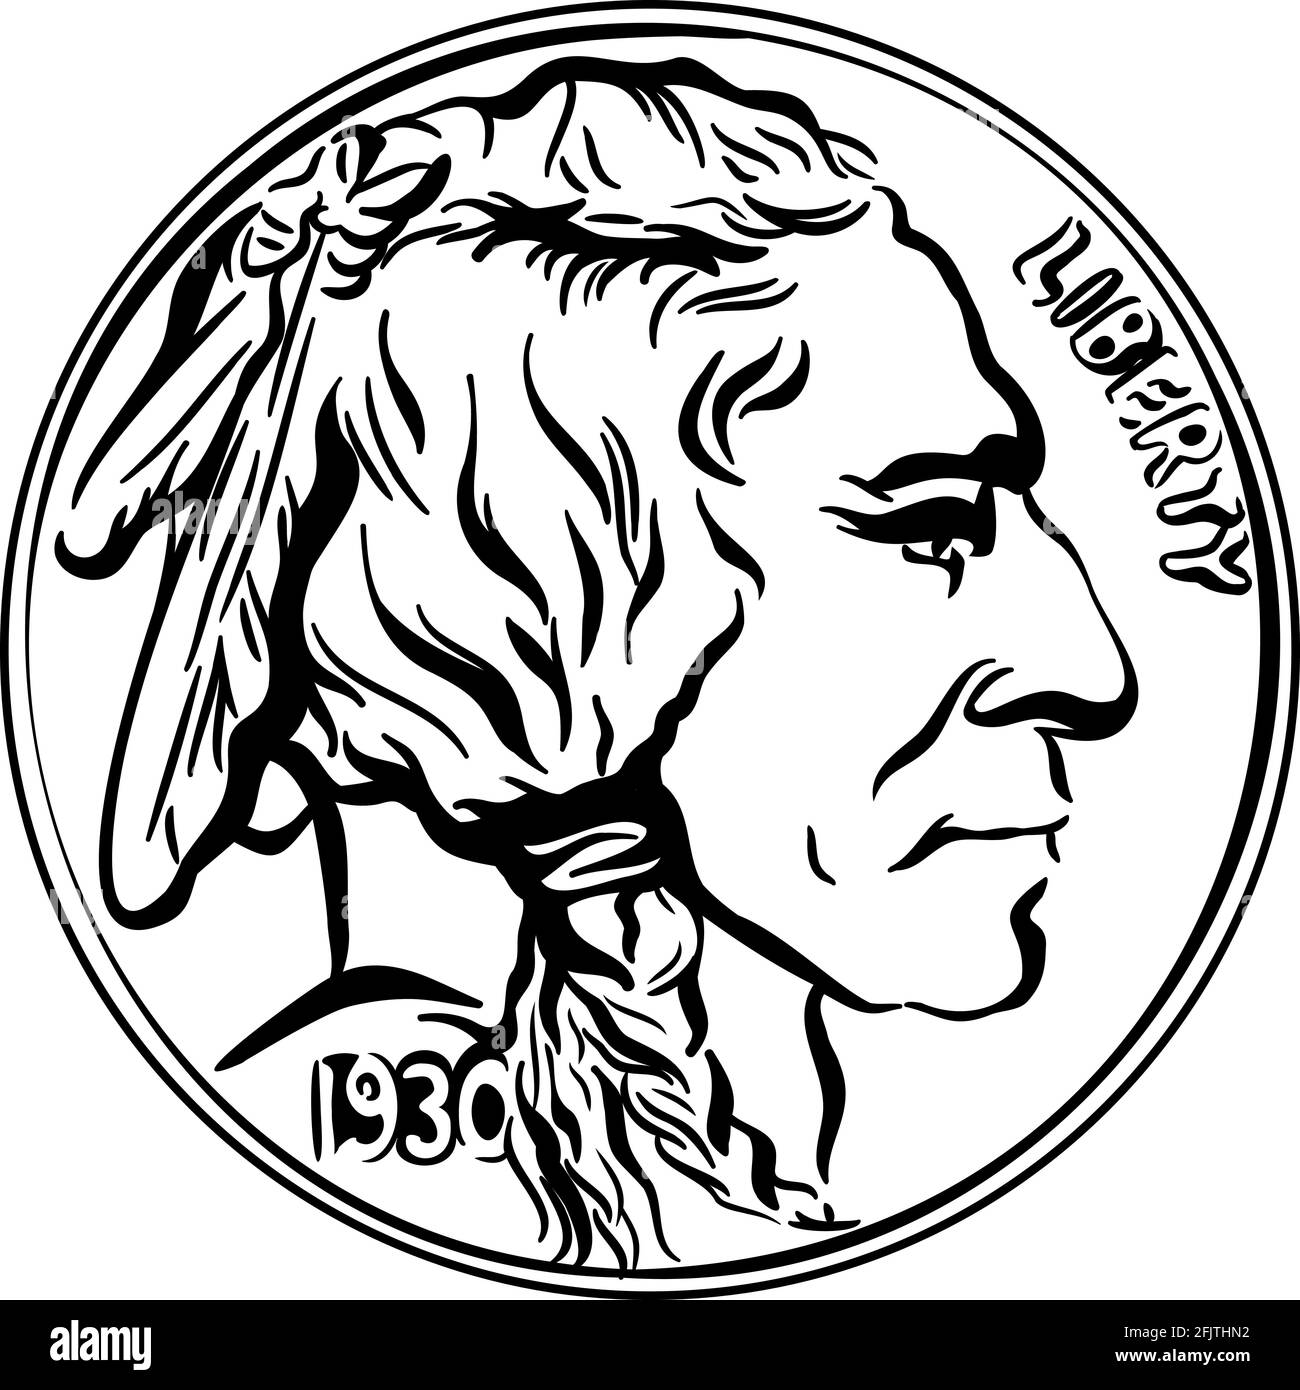 Black and white American money, Obverse of Buffalo nickel or Indian Head nickel 5 Cent Coin Stock Vector